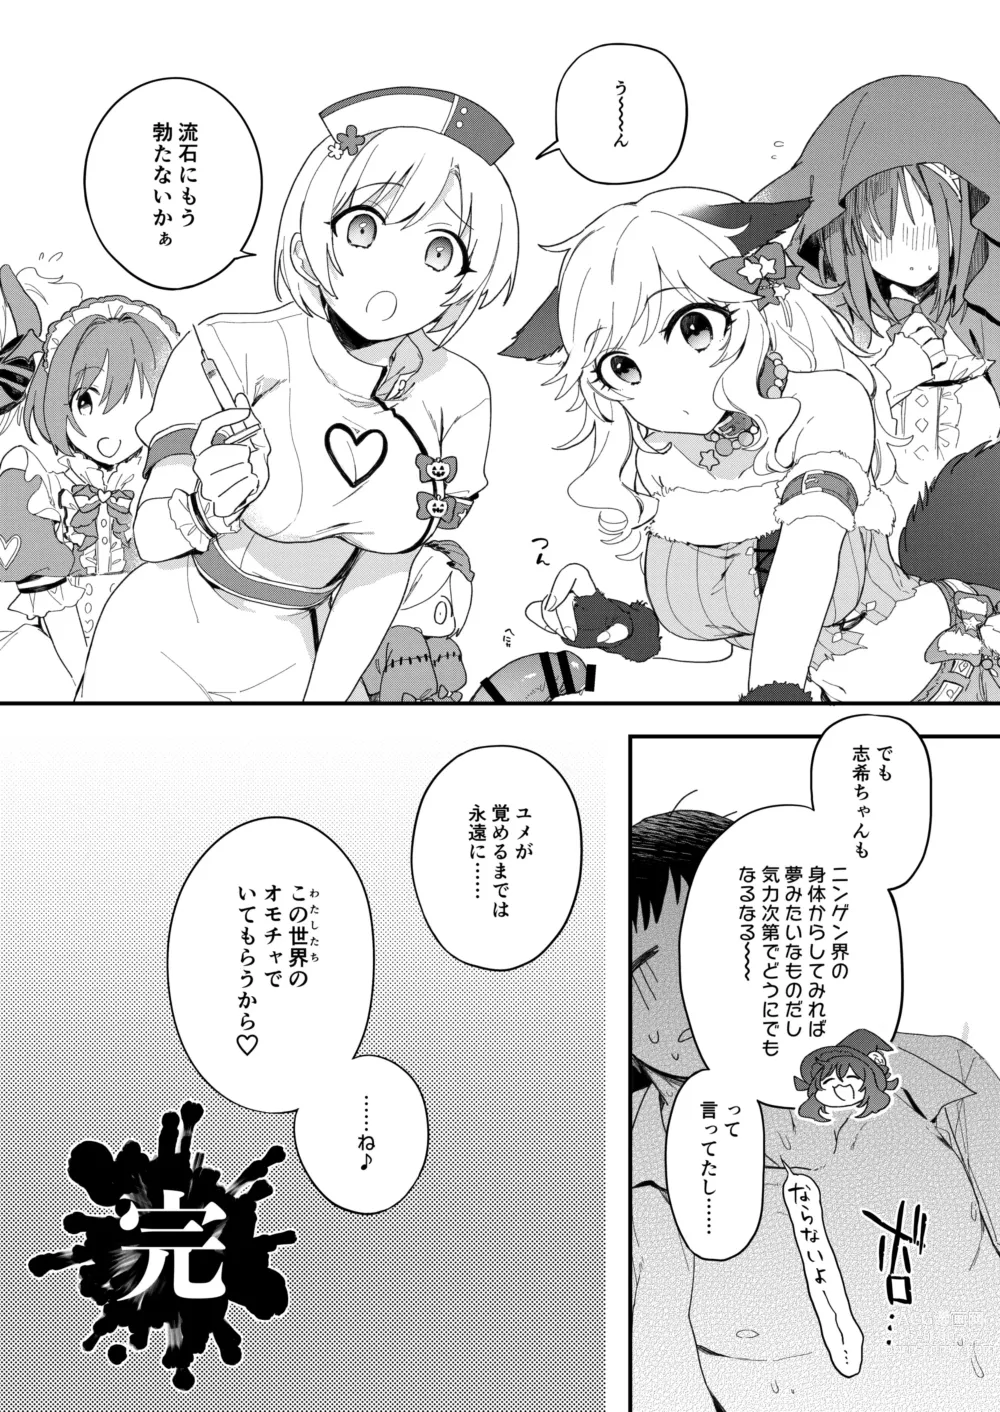 Page 39 of doujinshi Harem Halloween Party